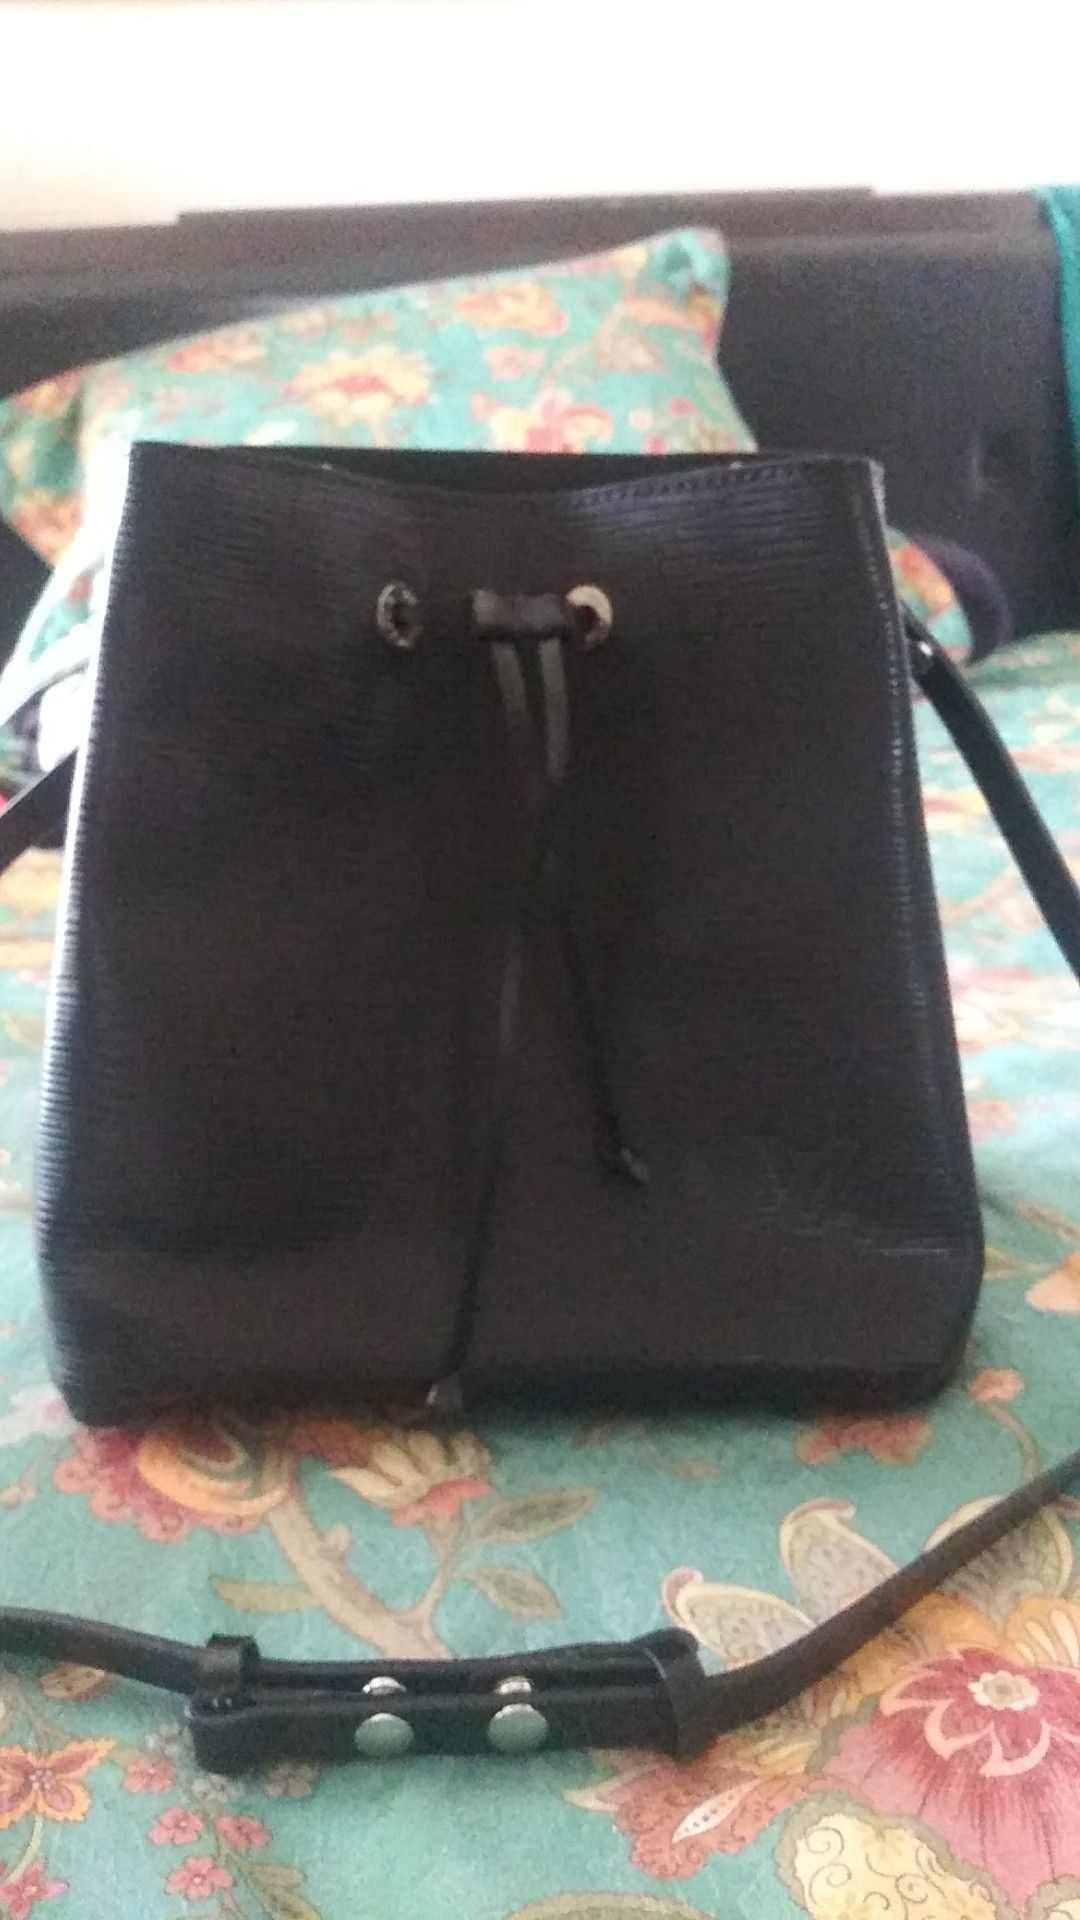 Bag never used.....$30